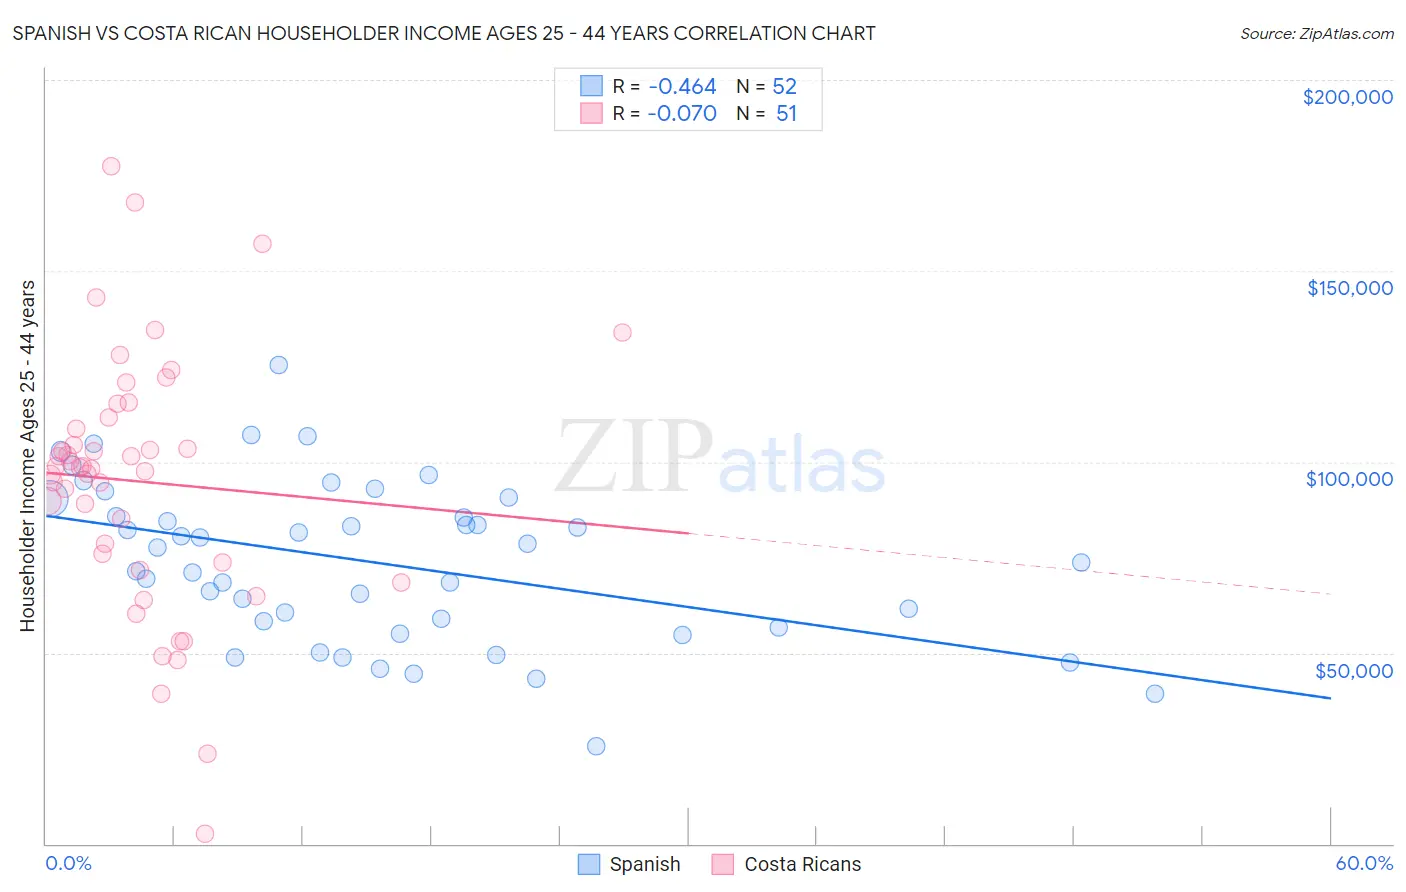 Spanish vs Costa Rican Householder Income Ages 25 - 44 years